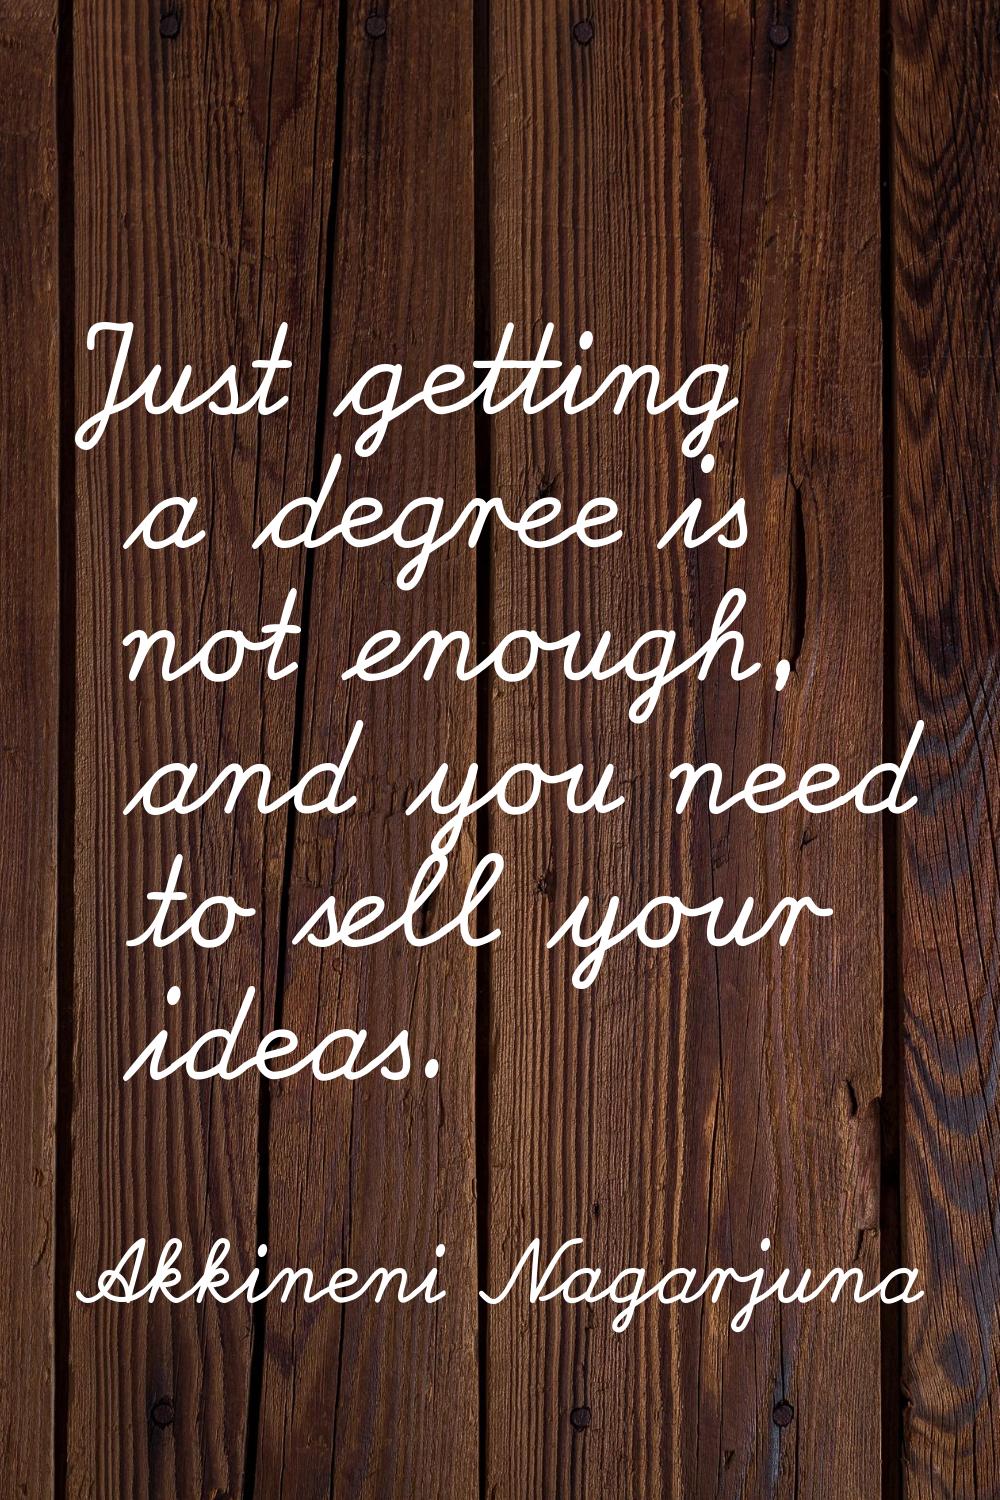 Just getting a degree is not enough, and you need to sell your ideas.